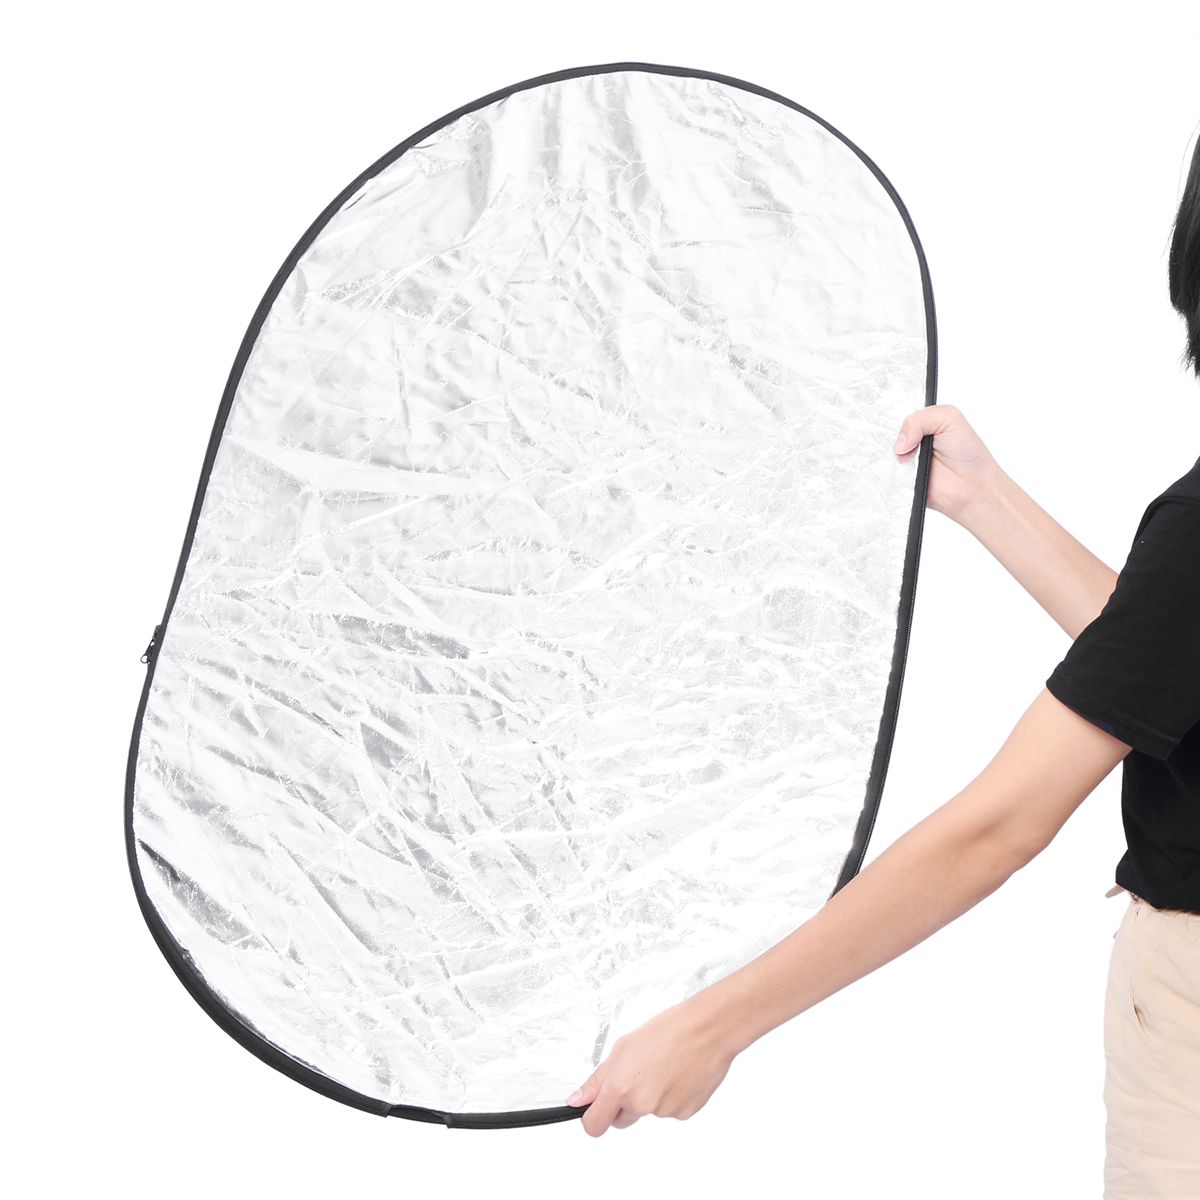 60x90cm-5-in1-Round-Collapsible-Photography-Reflector-Studio-Light-Reflector-Diffuser-Photography-Pr-1714049